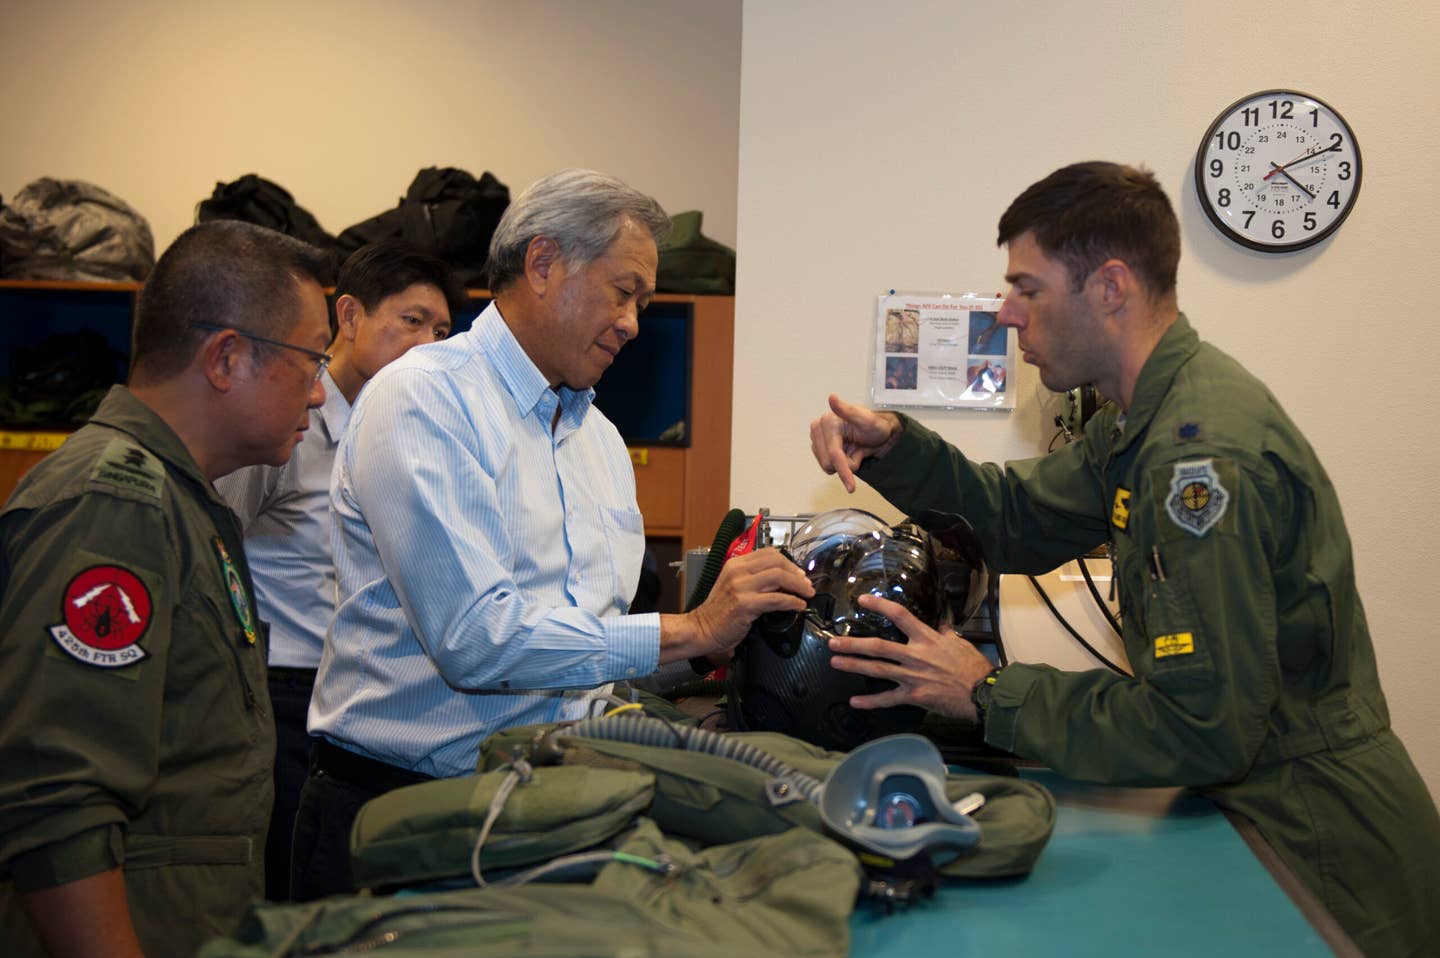 Singapore’s Minister for Defense, Dr. Ng Eng Hen, learns about the F-35 Helmet Mounted Display System during a visit to the 61st Fighter Squadron at Luke Air Force Base, Arizona, in December 2015. <em>U.S. Air Force photo by Staff Sgt. Staci Miller</em>